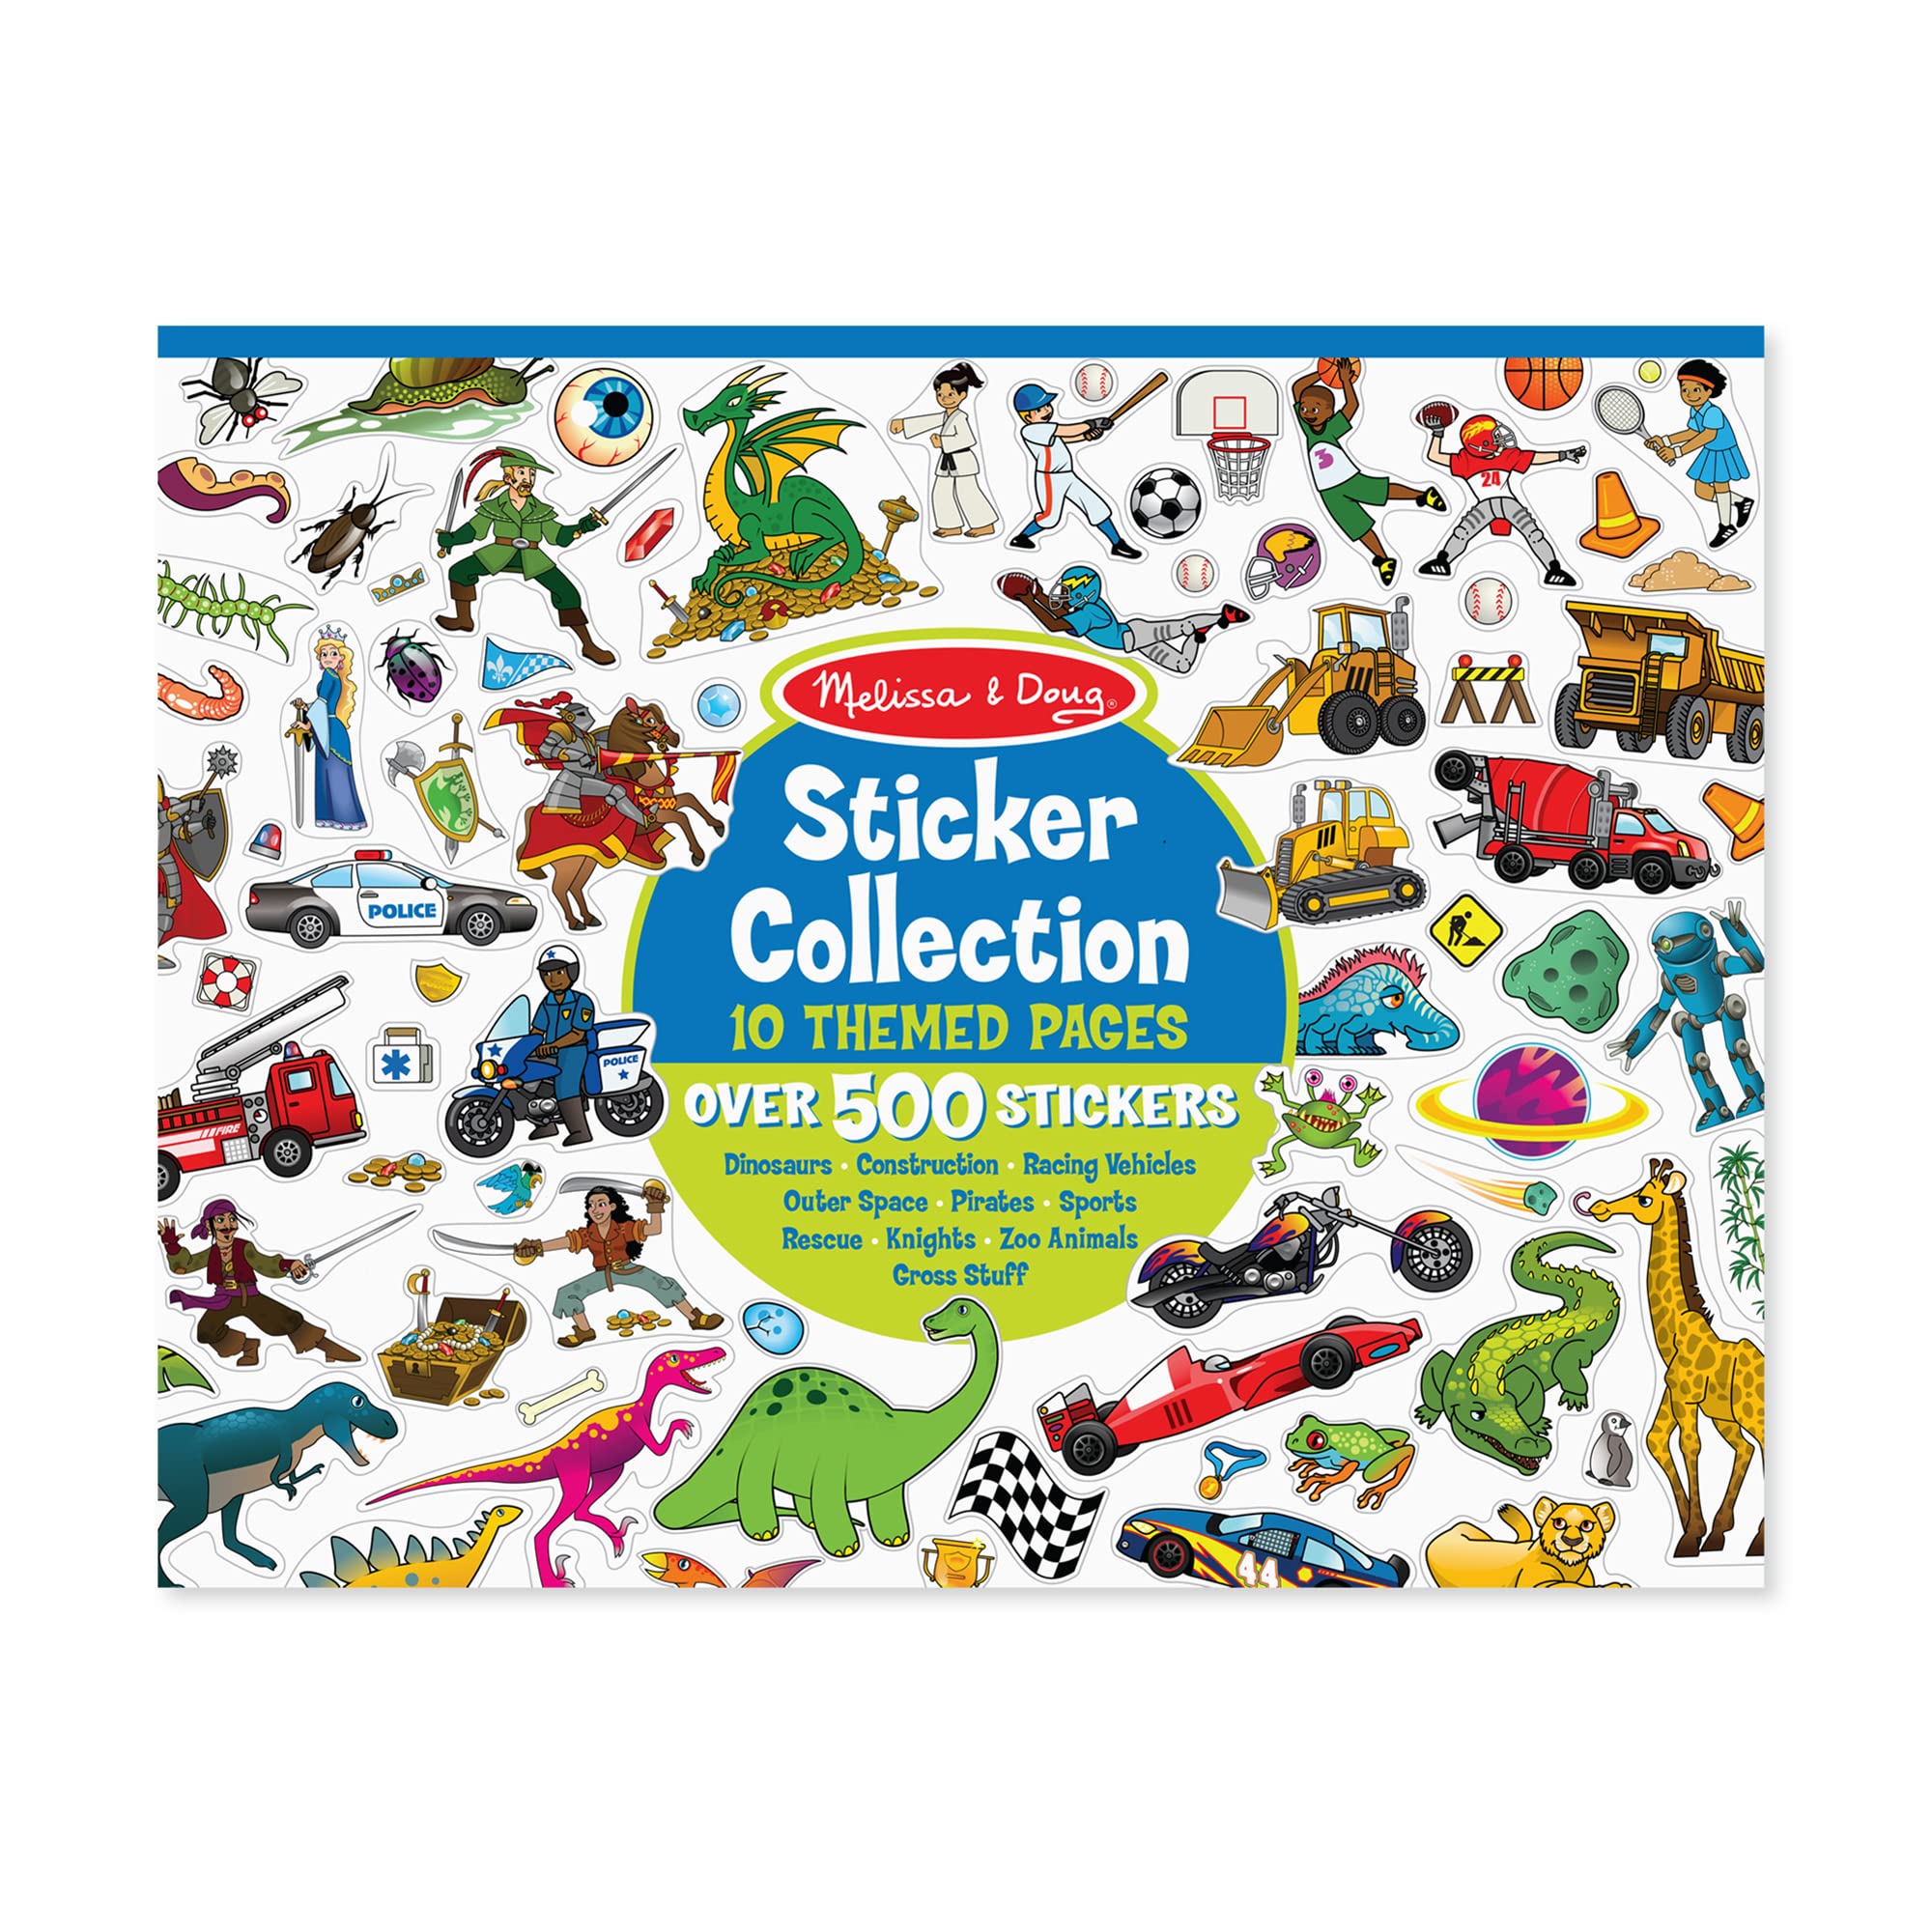 Melissa & Doug Sticker Collection Book: Dinosaurs, Vehicles, Space, and More - 500+ Stickers - Sticker Books, Arts And Crafts Activity For Kids Ages 3+